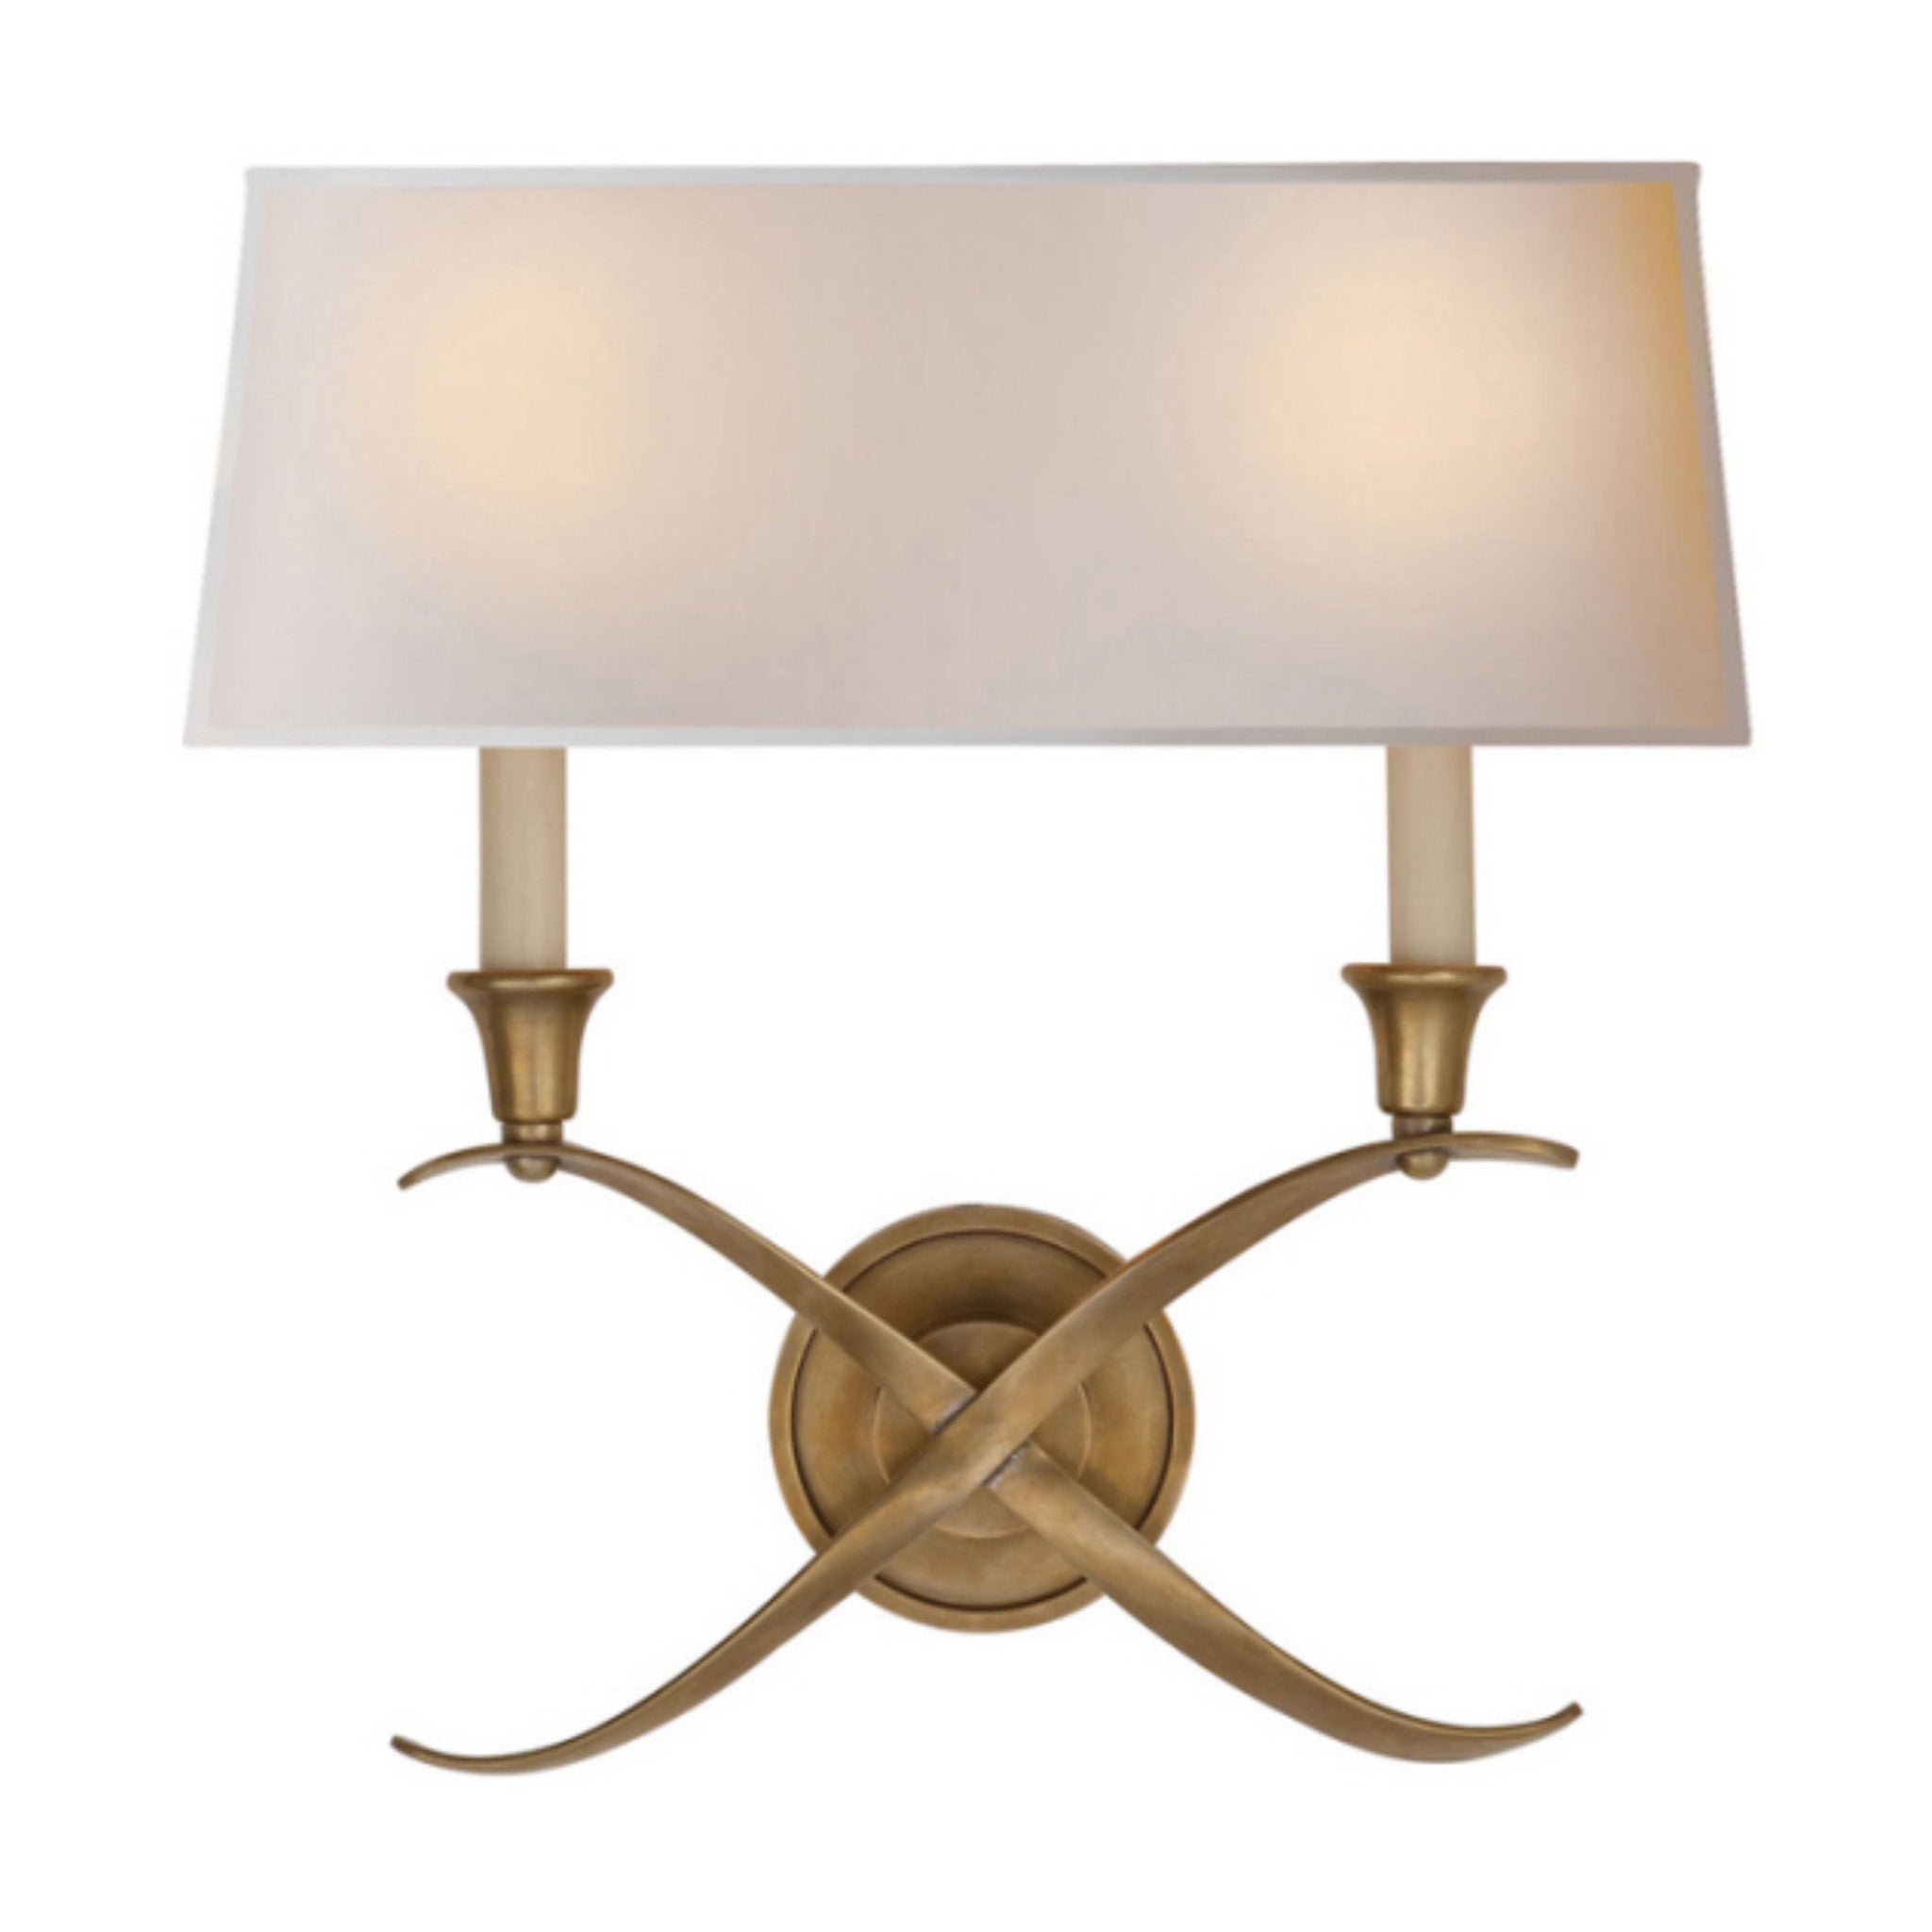 Chapman & Myers Cross Bouillotte Large Sconce in Antique-Burnished Brass with Natural Paper Shade